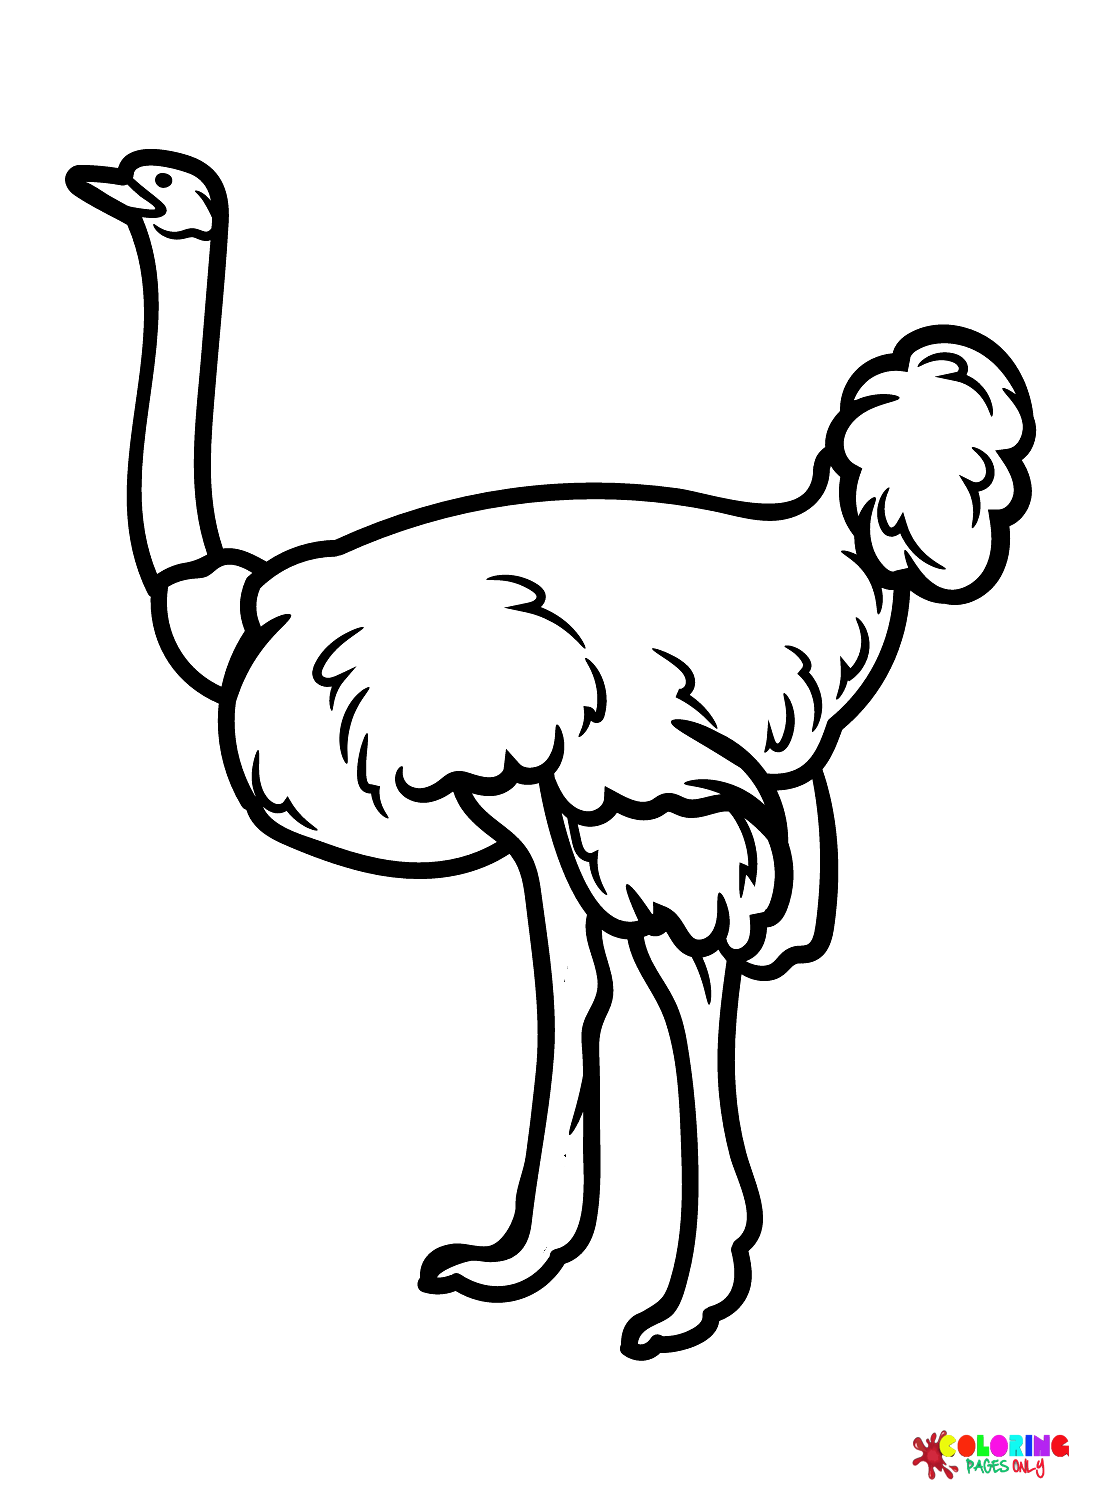 Images Ostrich from Ostrich